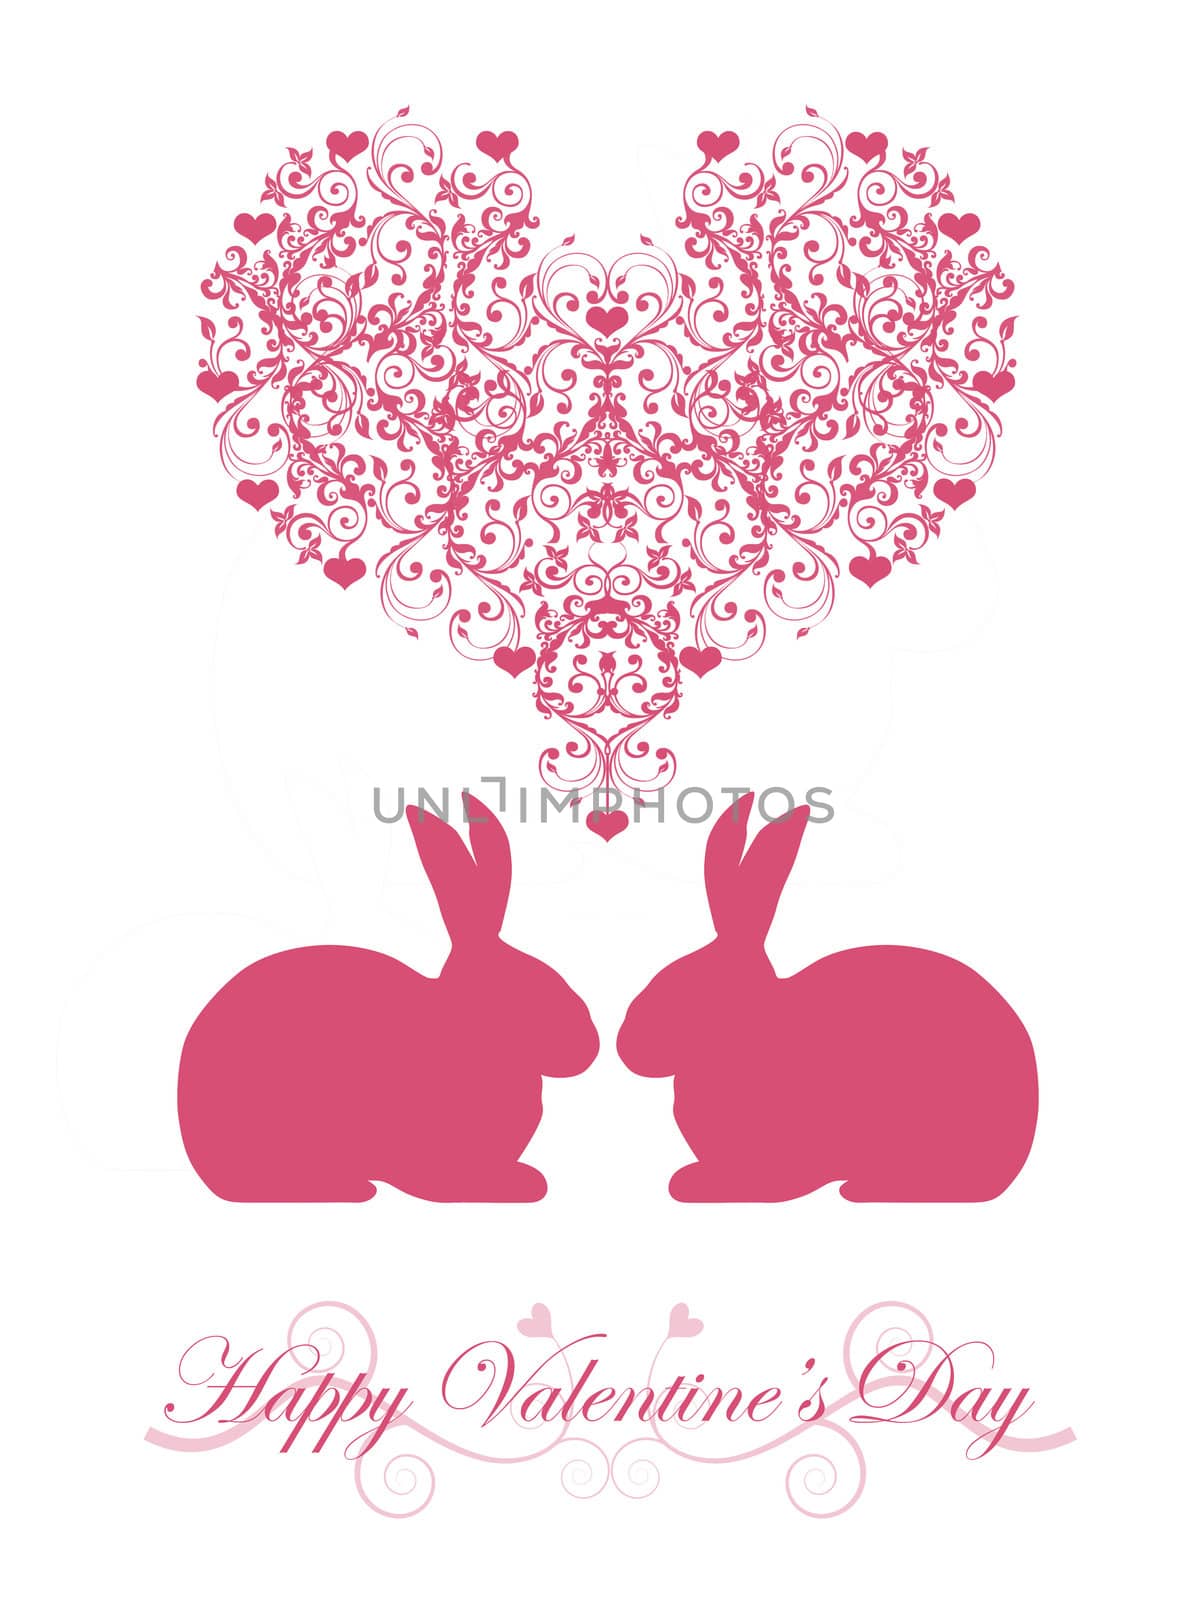 Happy Valentines Day Bunny Rabbit with Pink Hearts and Scrolls Illustration